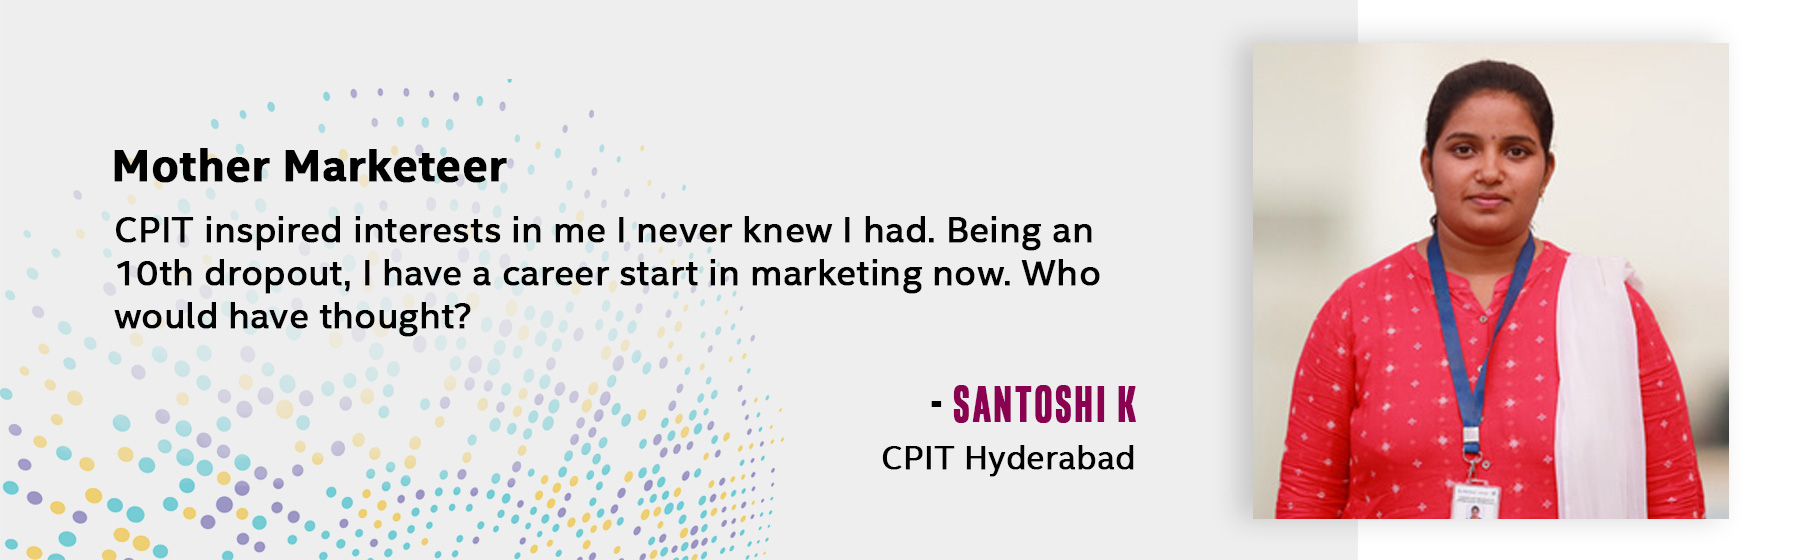 CPIT inspired interests in me I never knew I had. Being an 10th dropout, I have a career start in marketing now. Who would have thought?